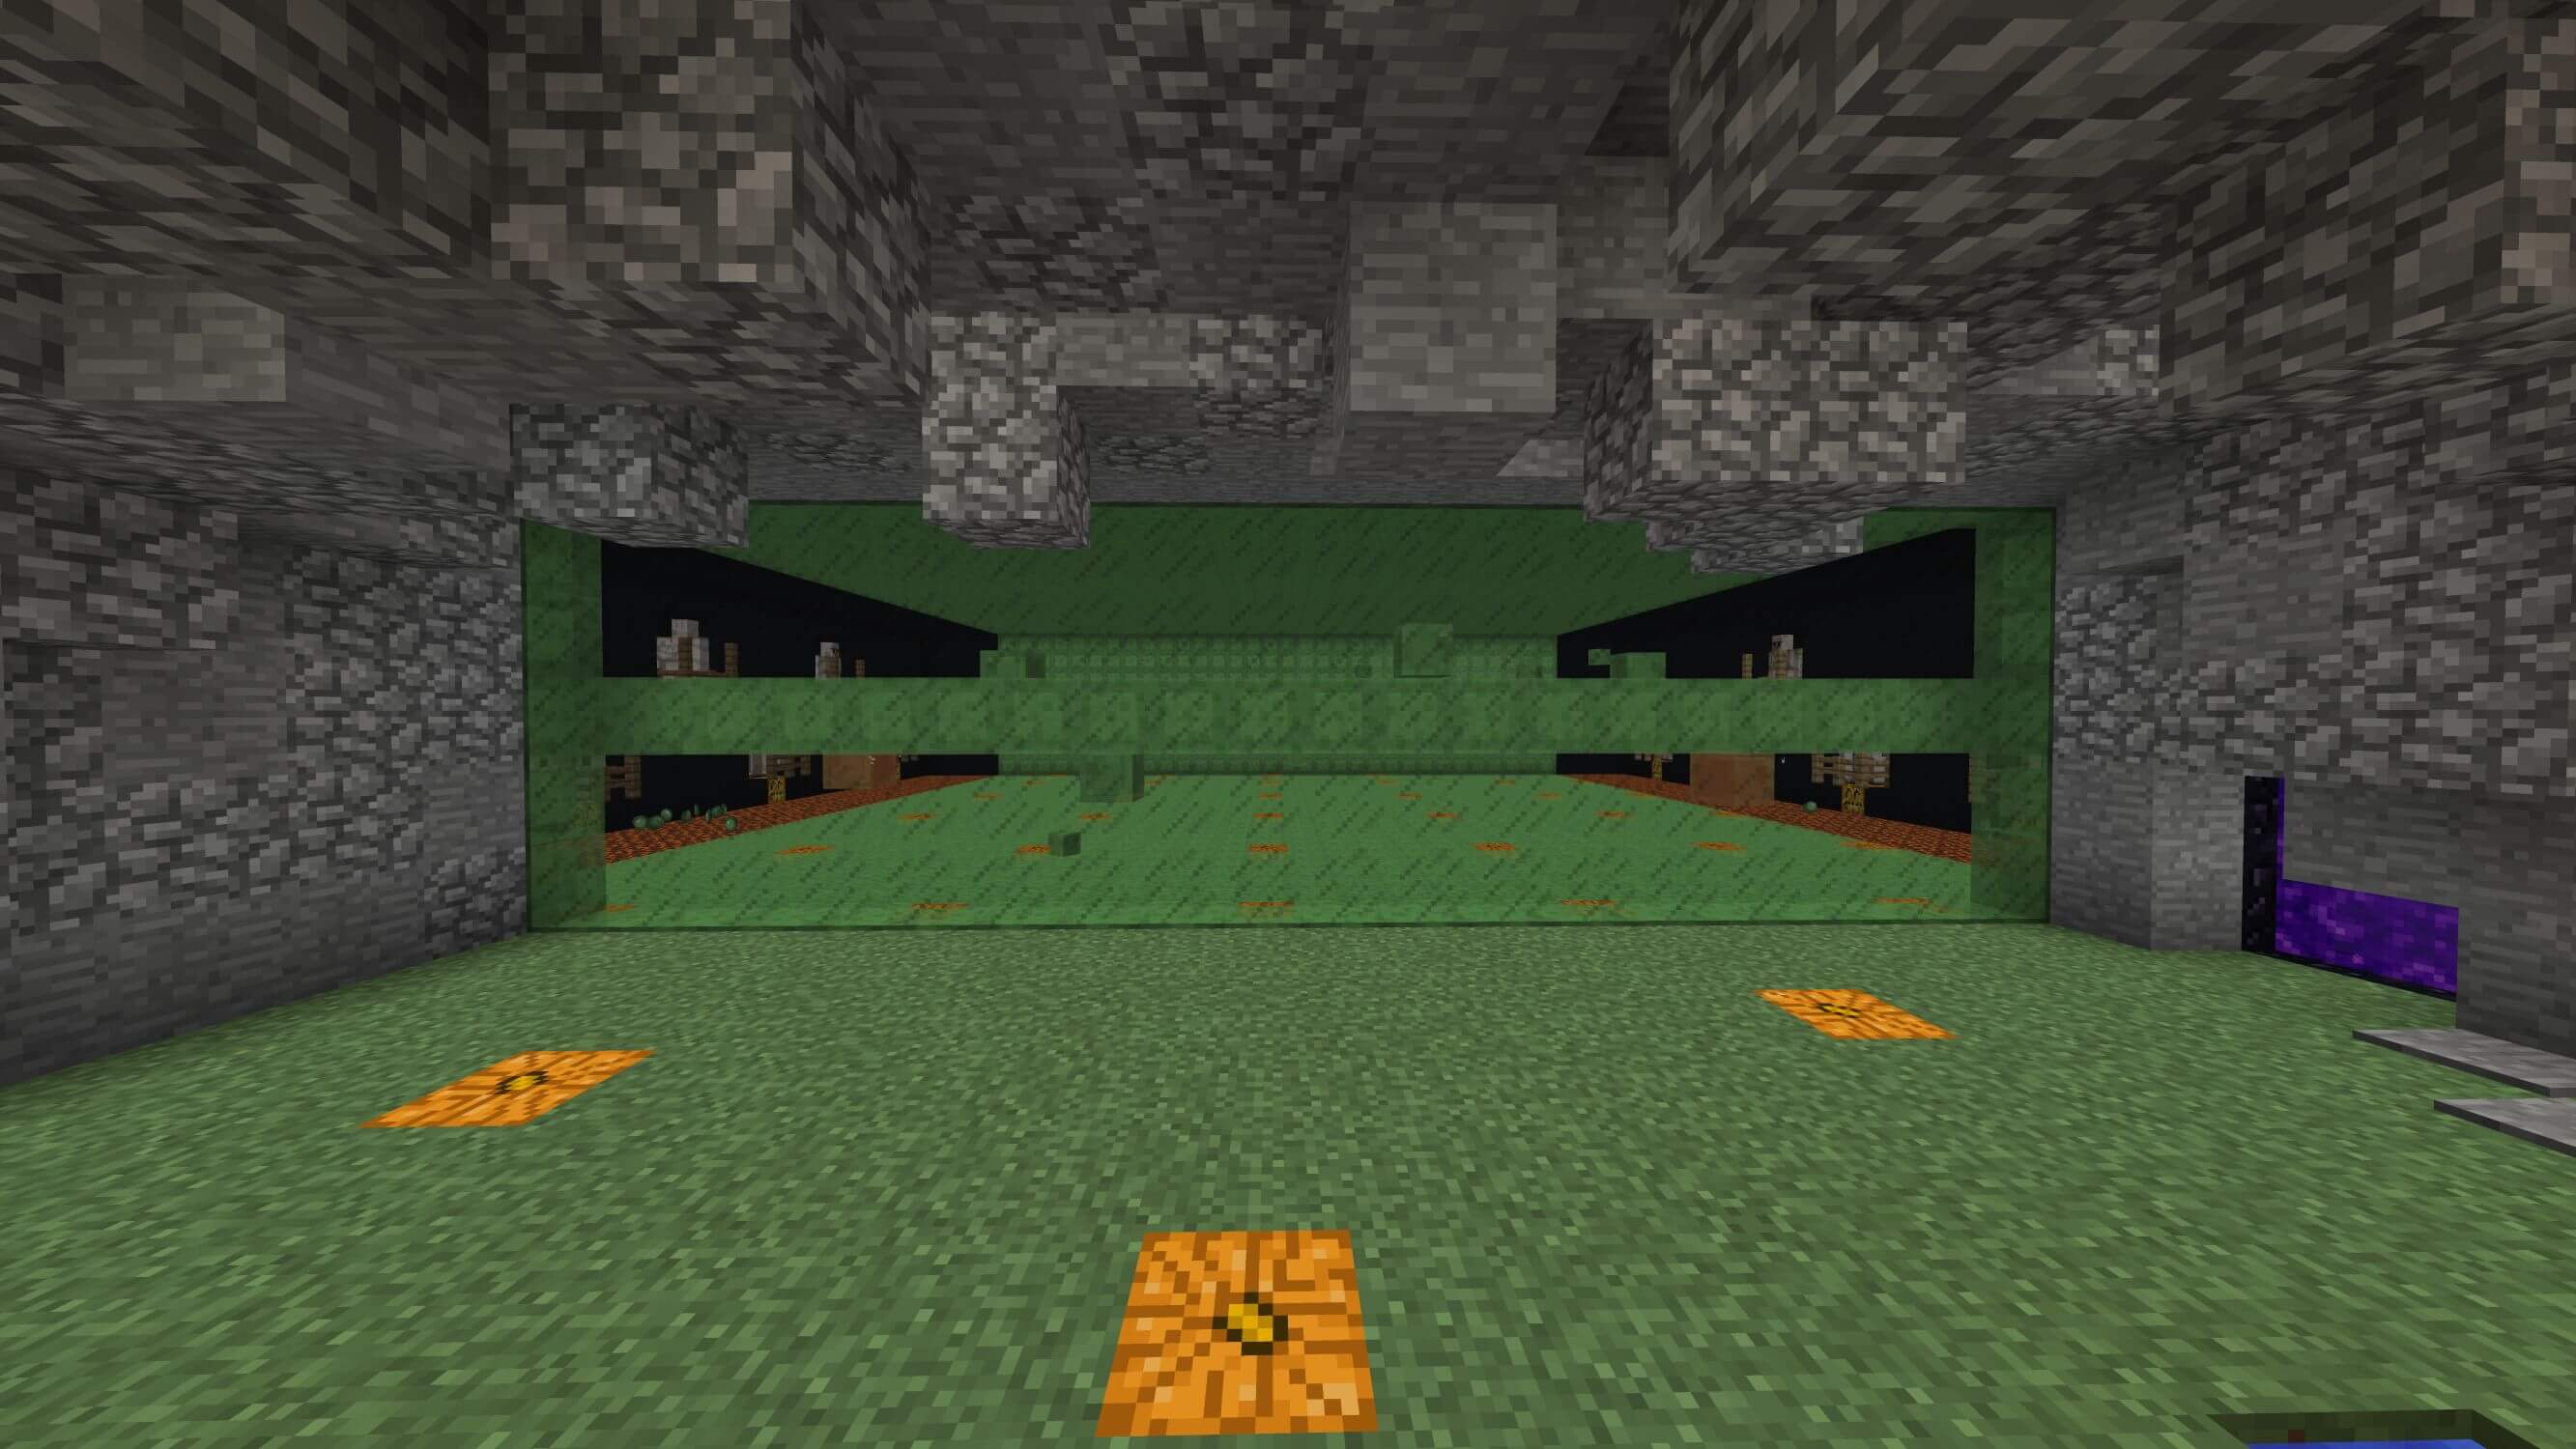 Looking in to the slime farm from the AFK area